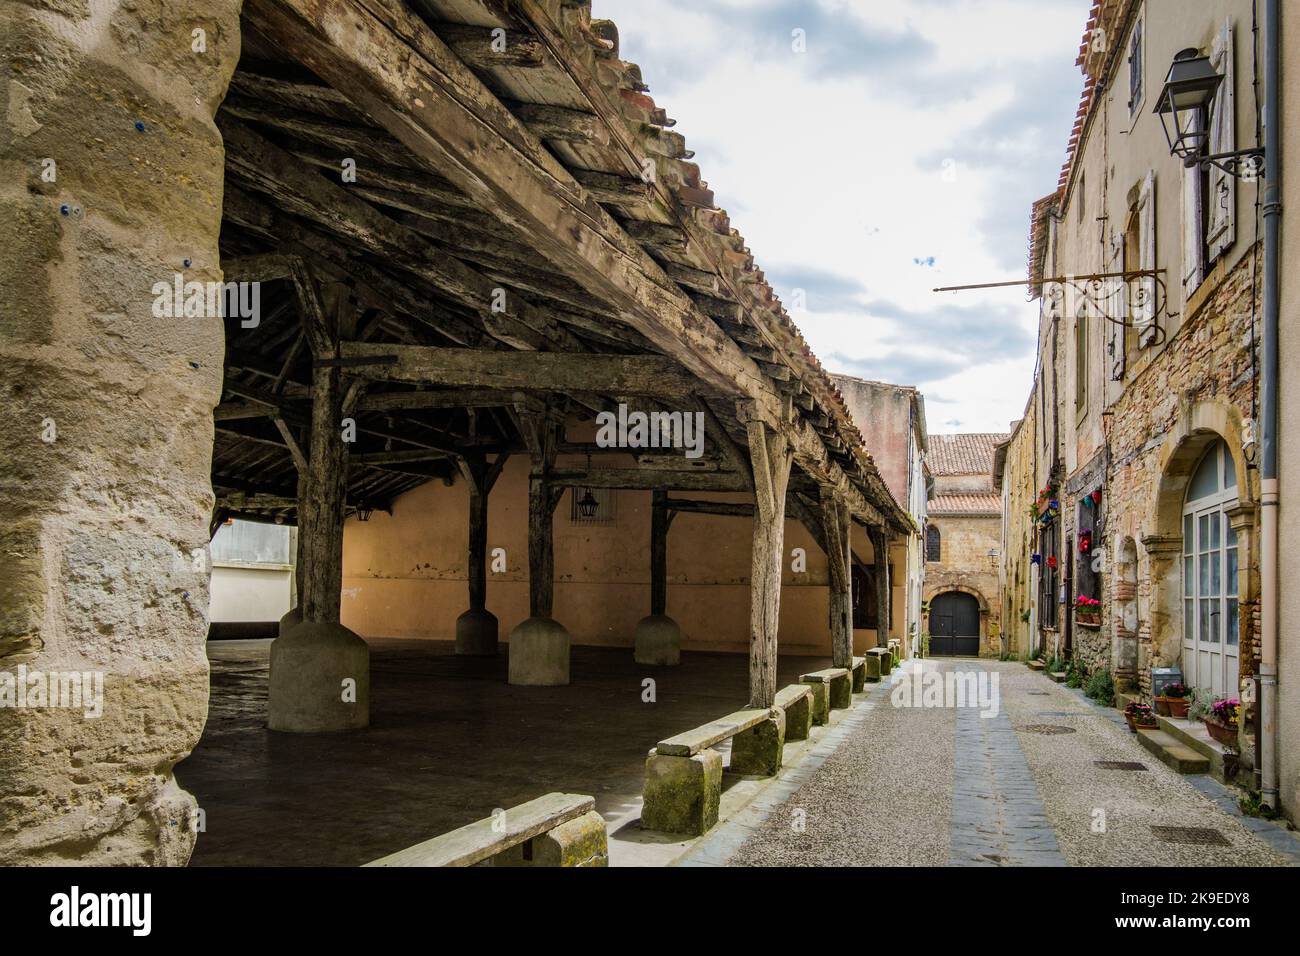 Narrow street, old facade and medieval market hall in the village of Fanjeaux in the south of France (Aude) Stock Photo